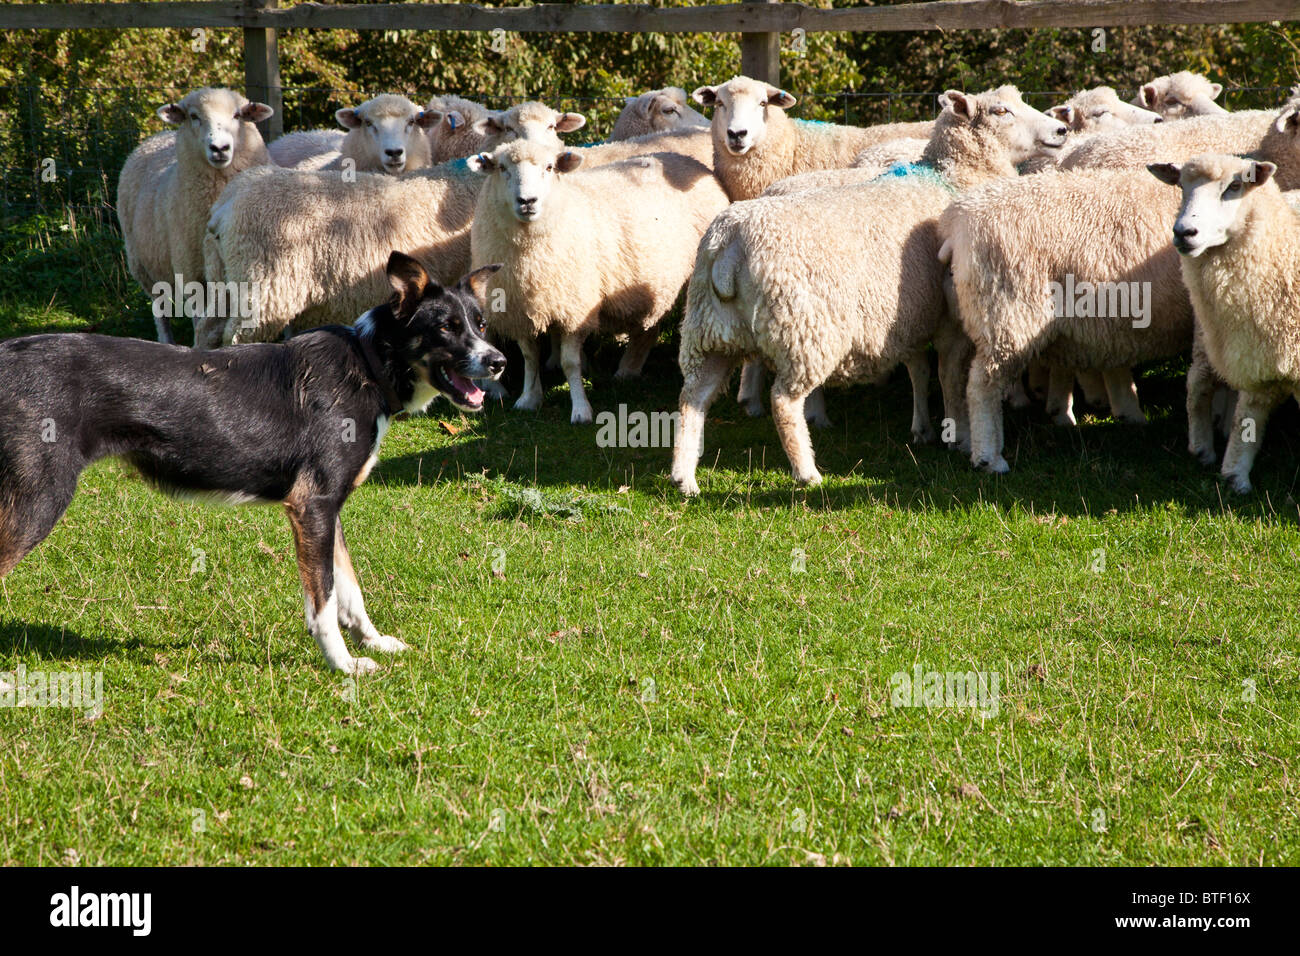 A border collie sheepdog controlling a flock of Romney sheep in a field against the fence Stock Photo